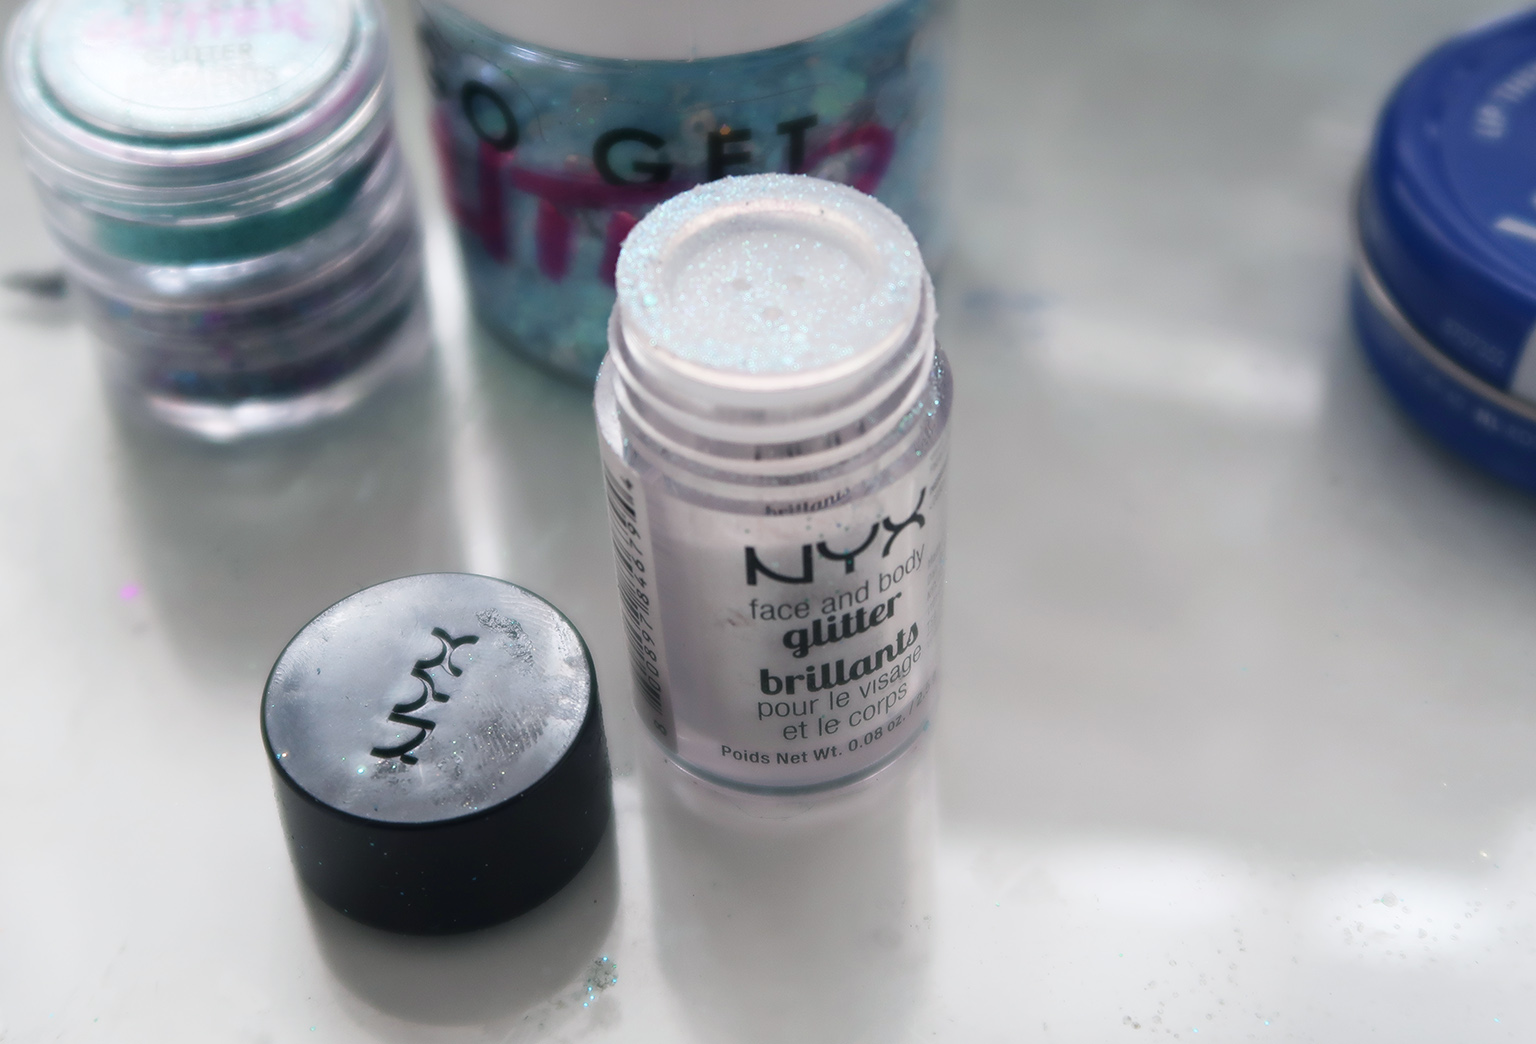 nyx face and body glitter